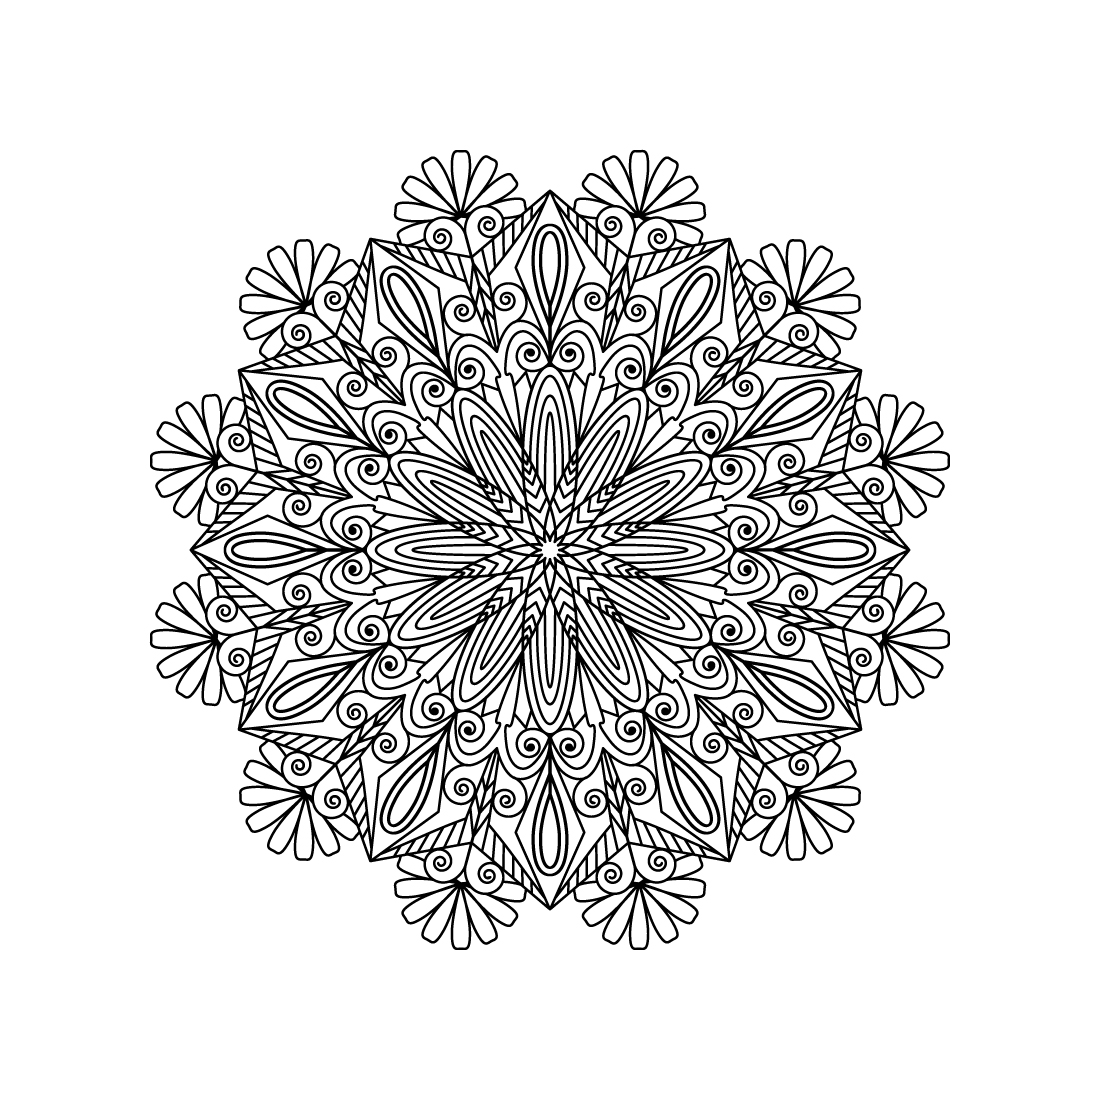 Bundle of 10 Relaxation Mandalas for Paper Cutting or Coloring Book